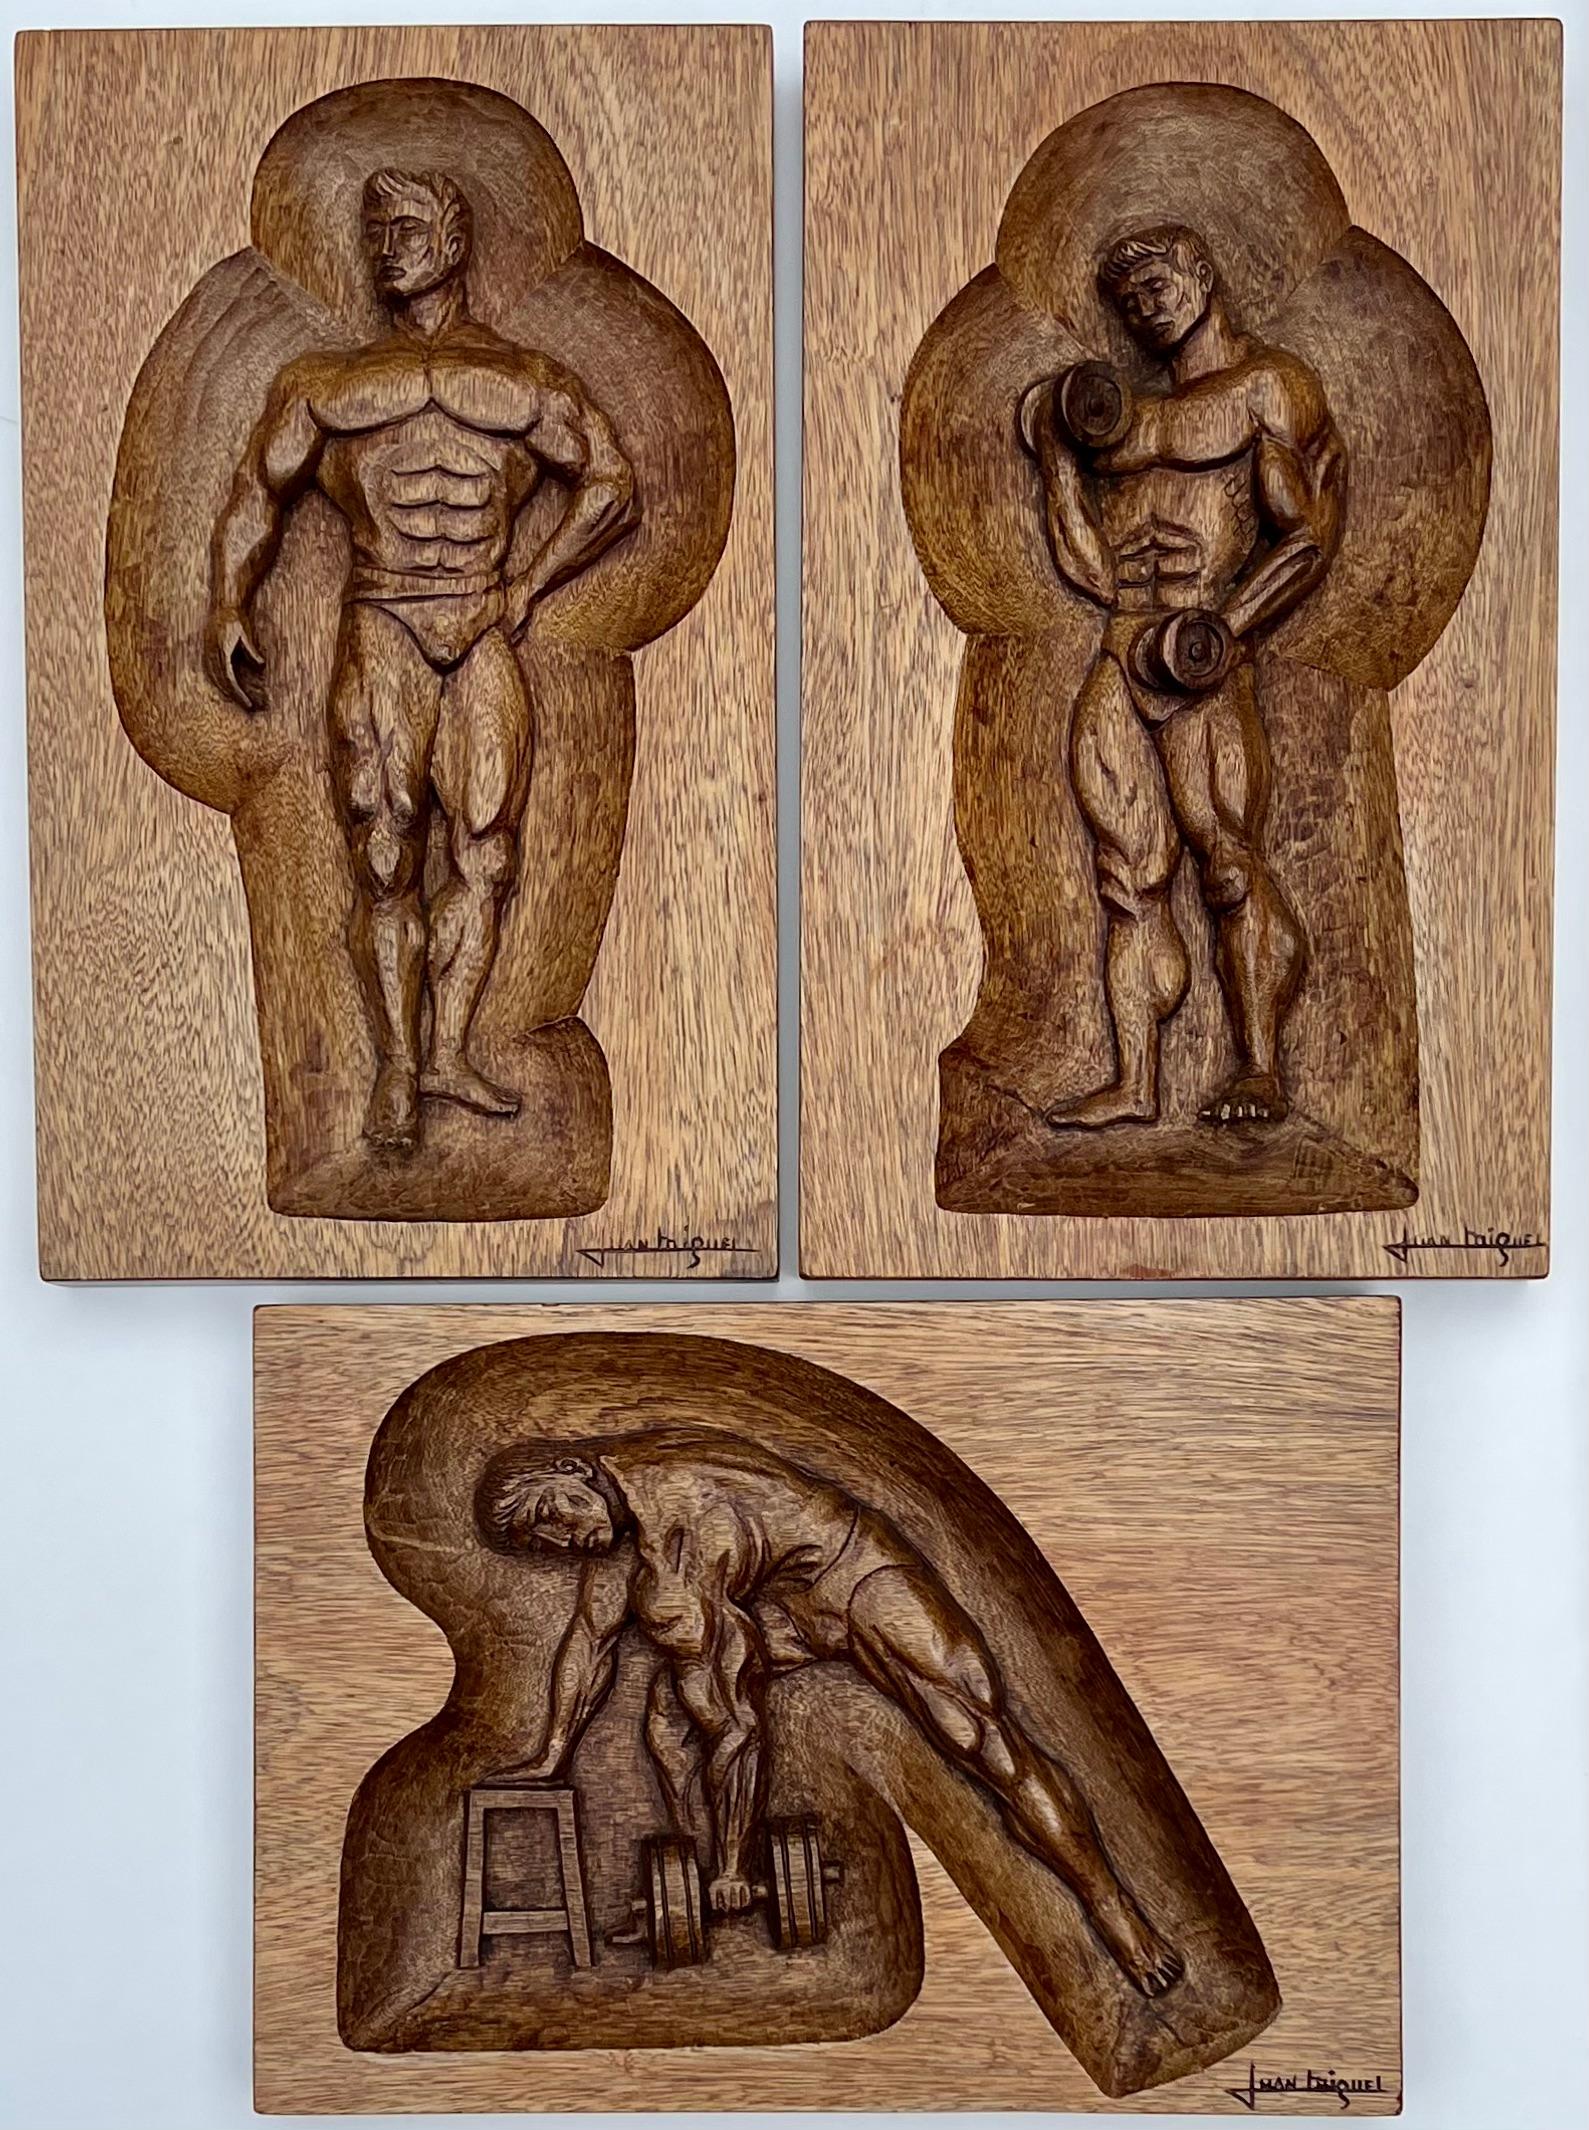 Juan Miguel Figurative Sculpture - 3 Carved Wood Plaques Outsider Modern Mid 20th Century Latin Gay LGBT Beefcake